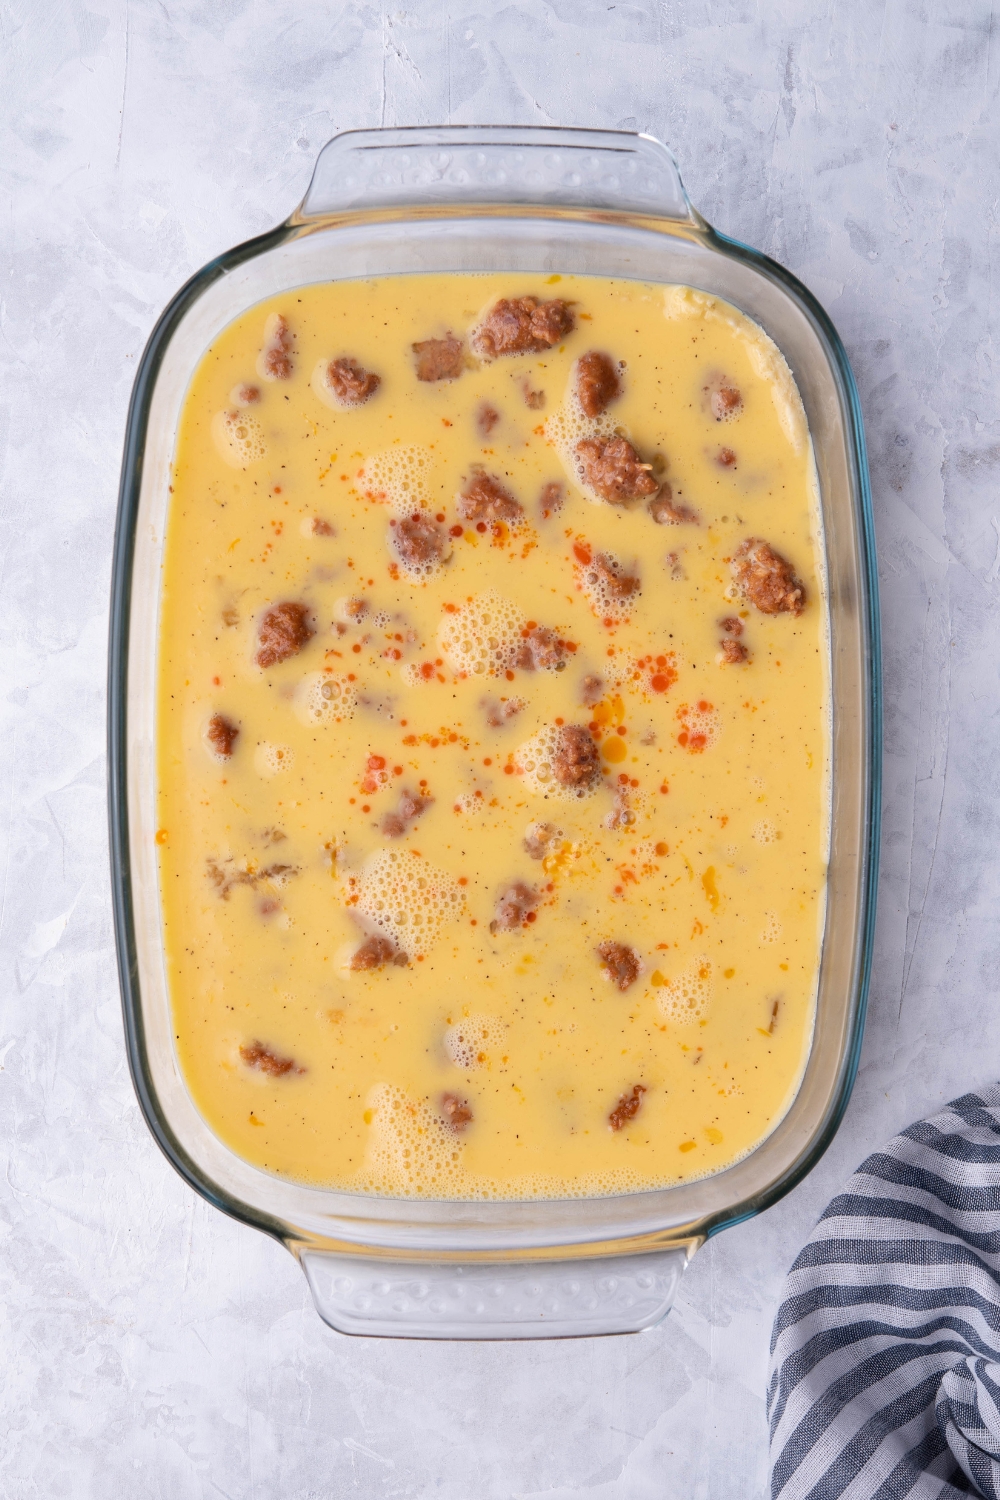 Egg mixture on top of sausage pieces in a casserole dish.